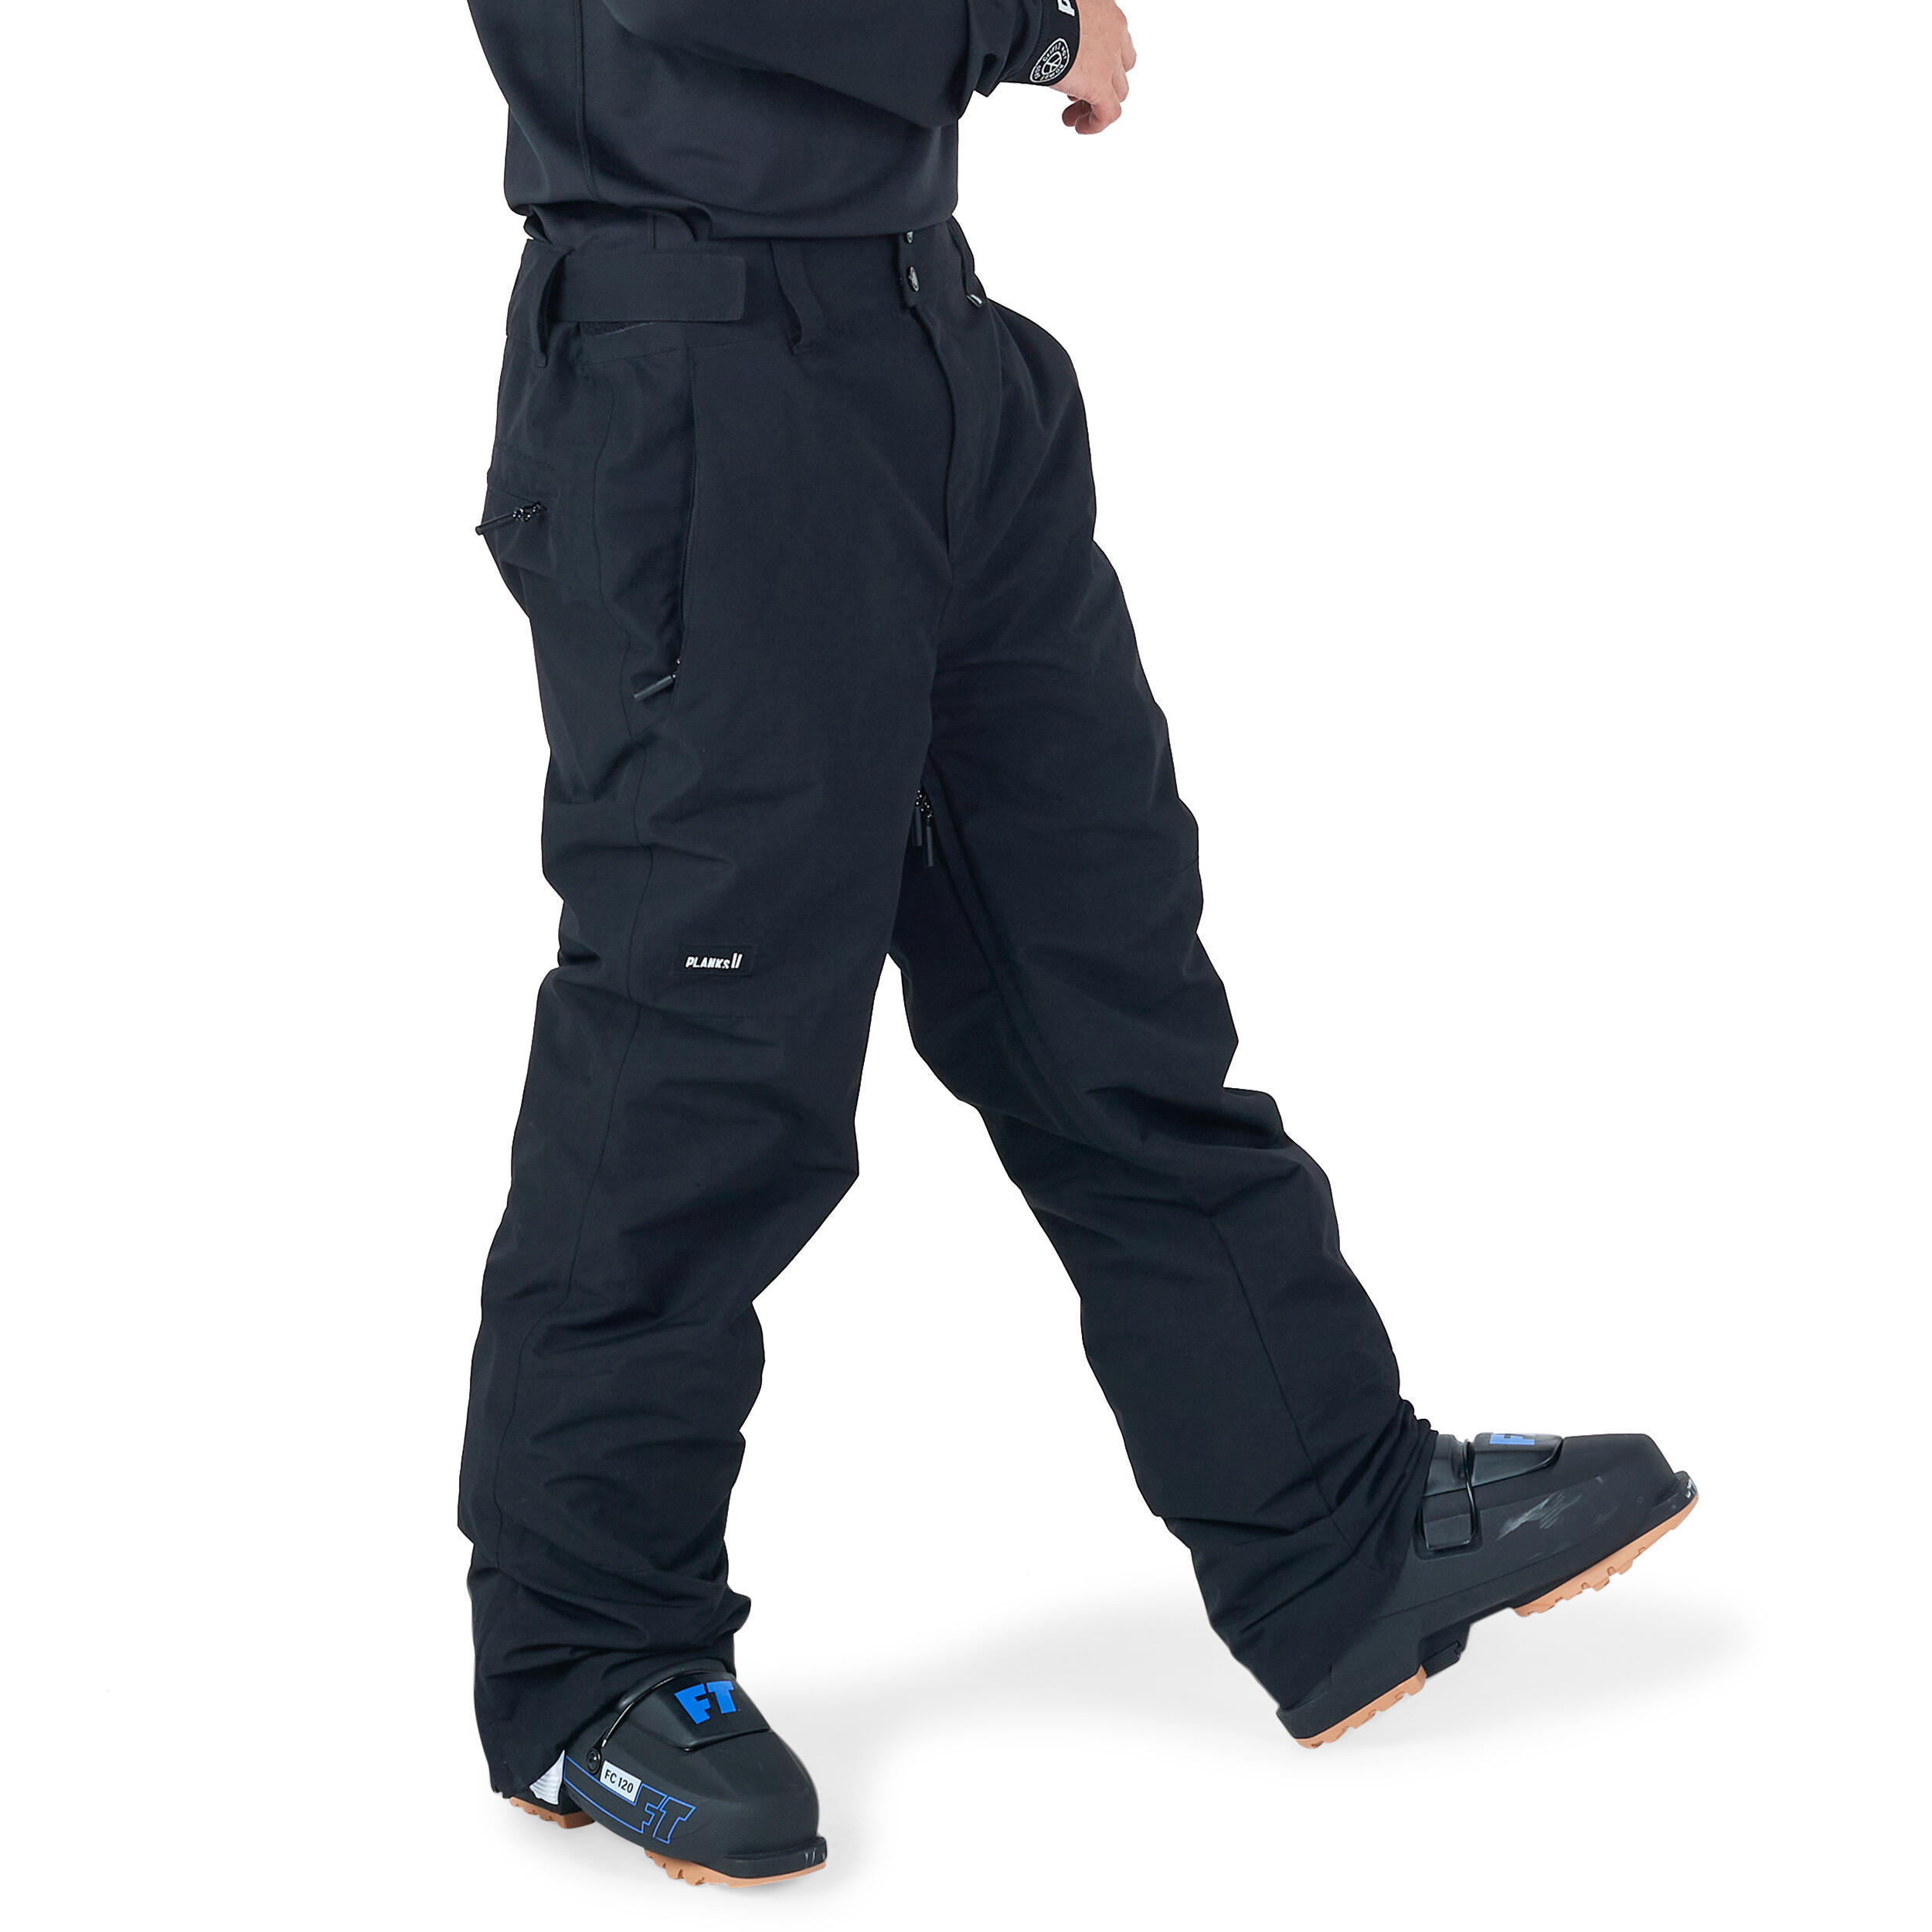 PLANKS Planks Easy Rider Men's Ski Pants in Black with Pockets - Breathable Trousers